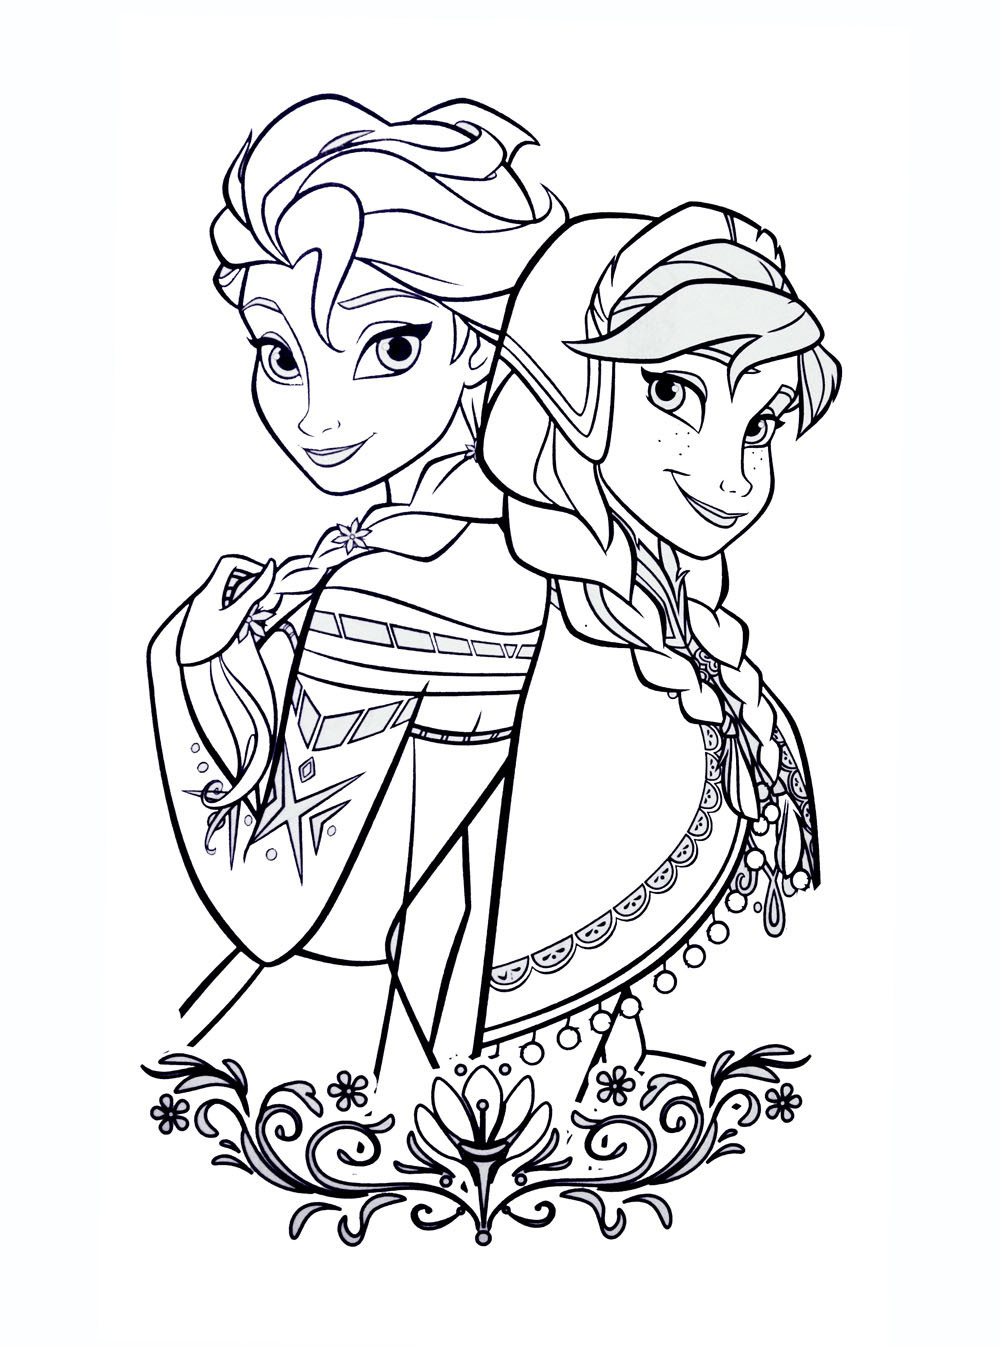 Frozen Coloring Books For Kids
 Frozen free to color for kids Frozen Kids Coloring Pages